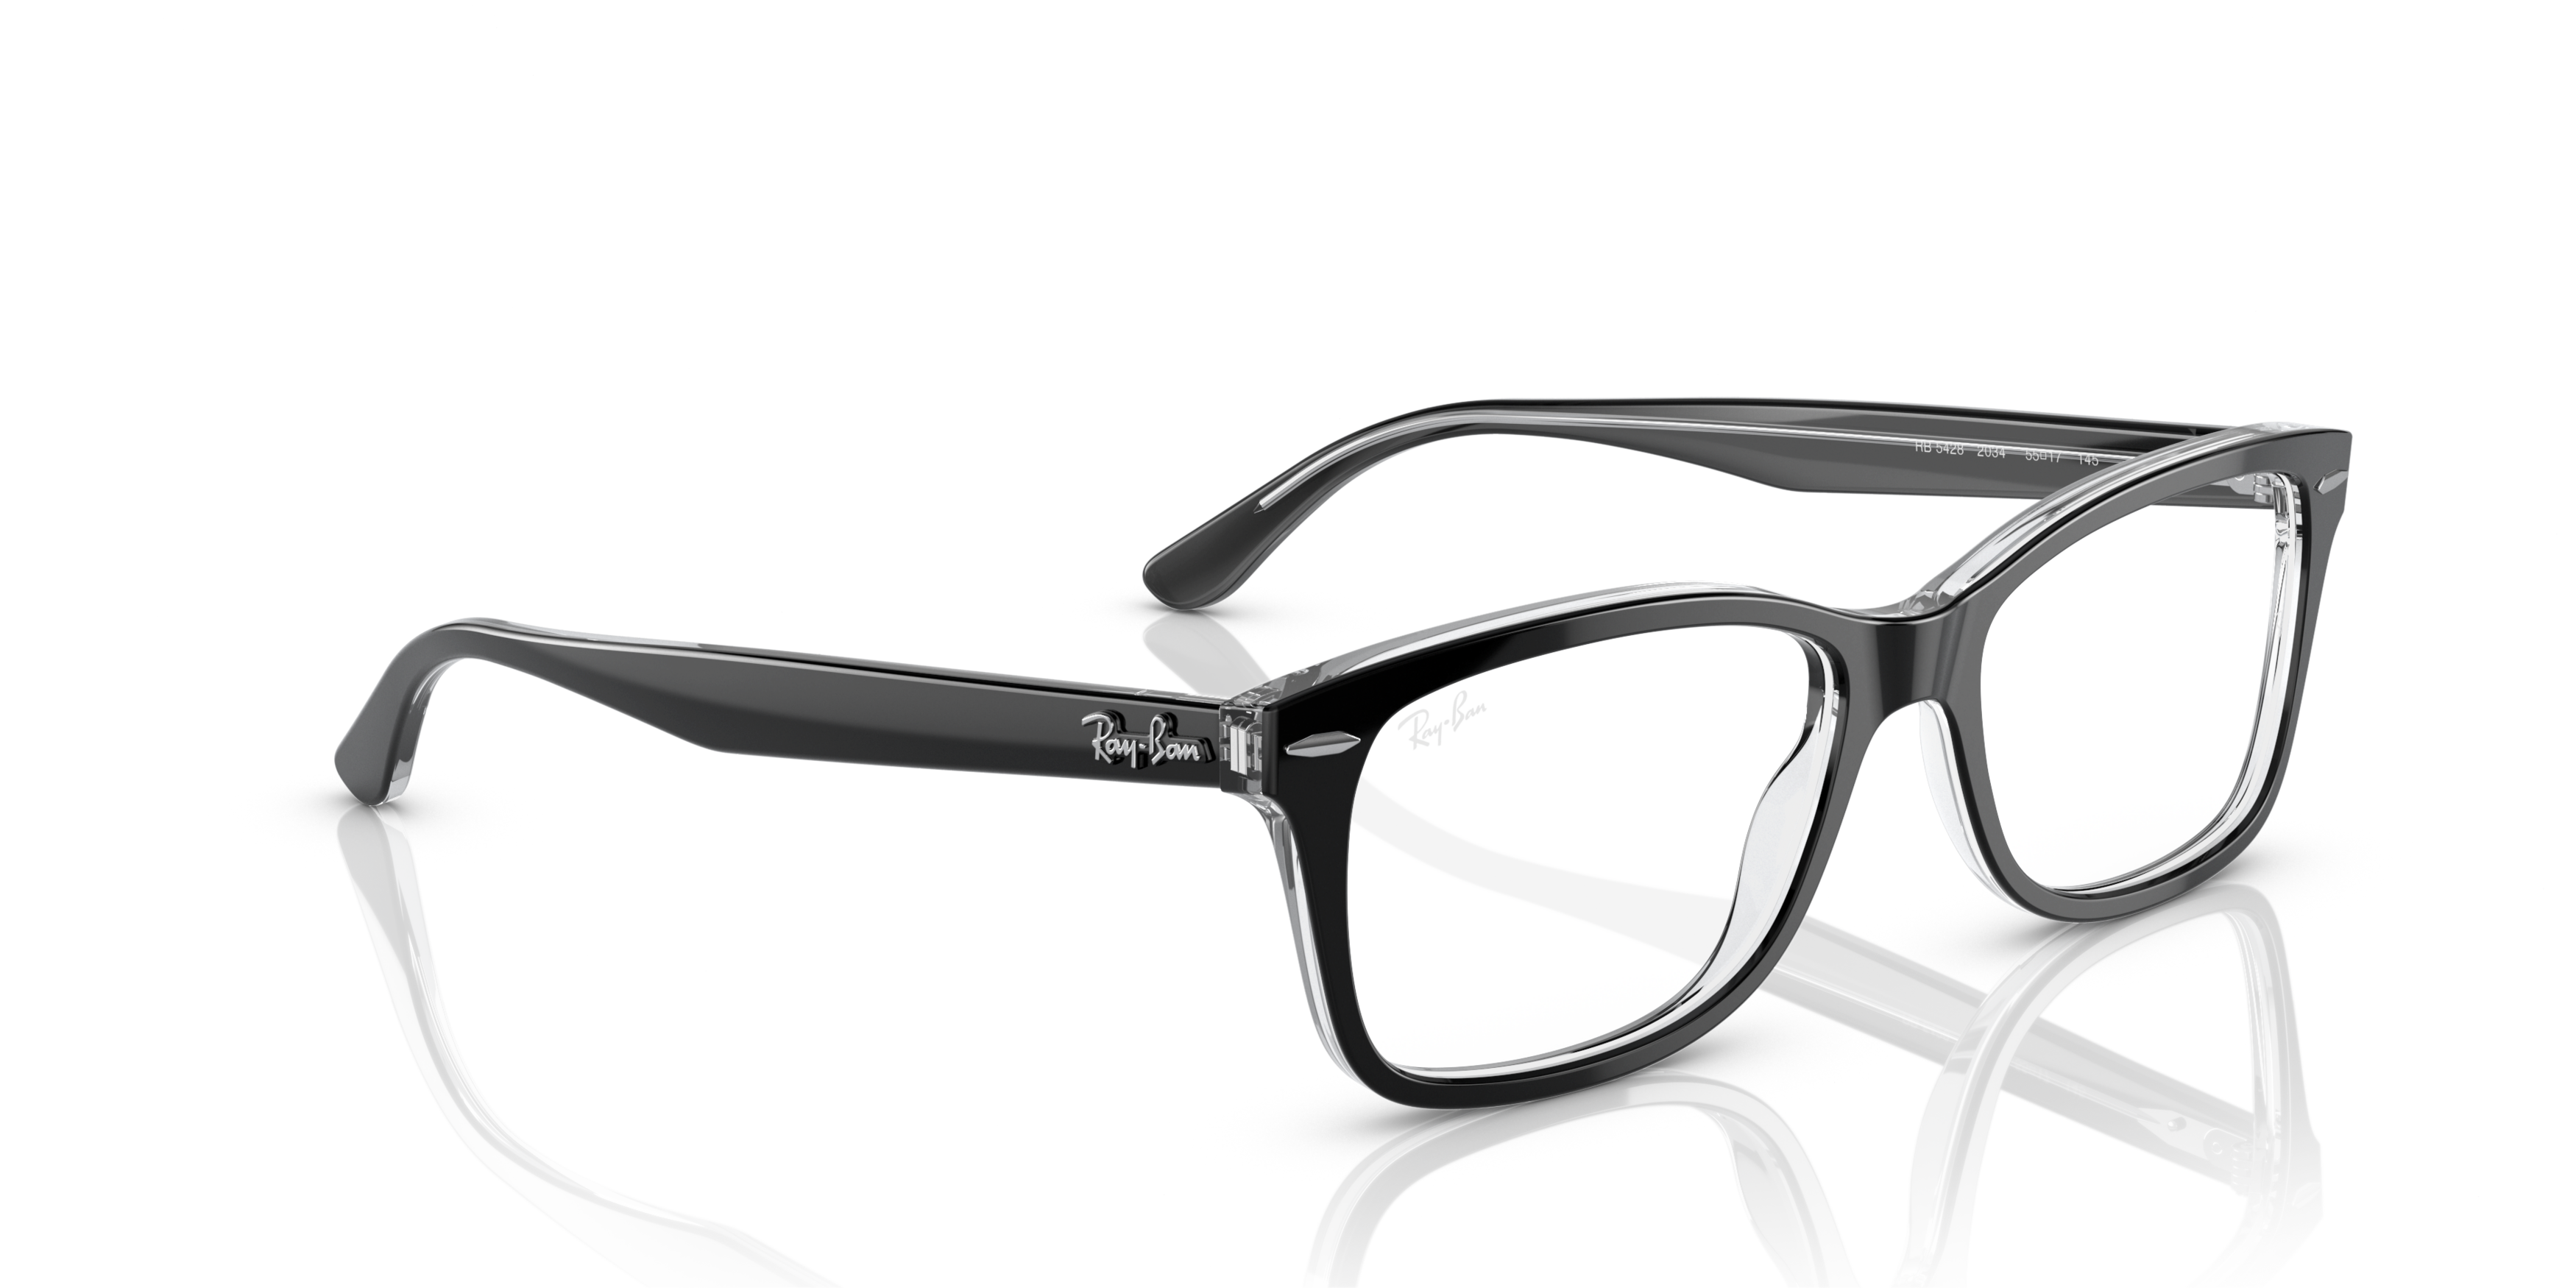 Angle_Right01 Ray-Ban RX 5428 Glasses Transparent / Black